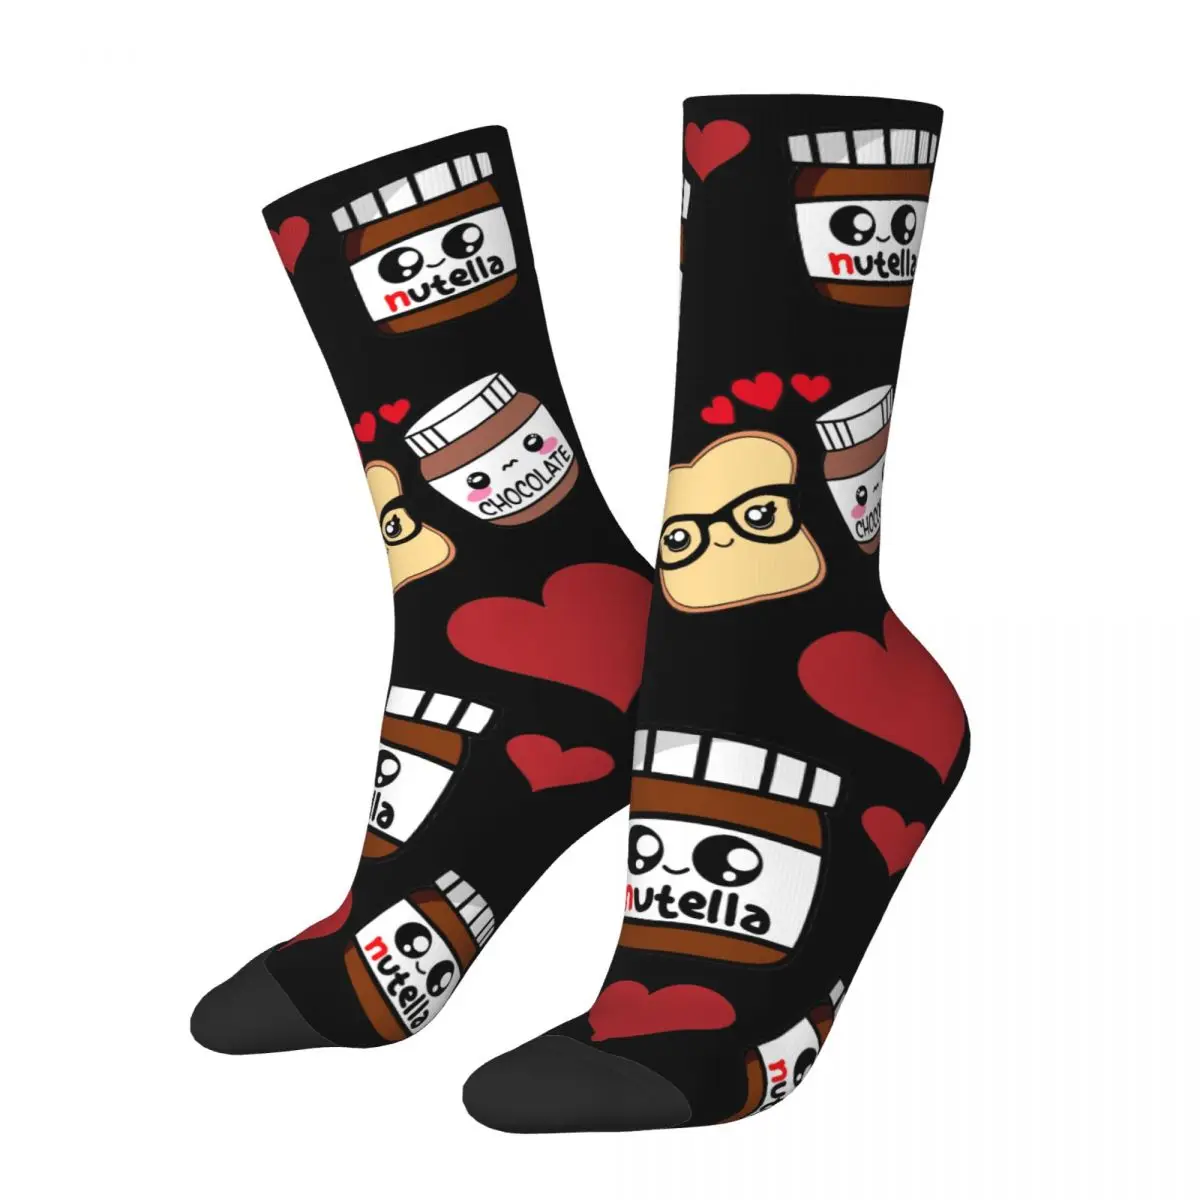 Foods Nutella Cartoon Men Women Socks Windproof Applicable throughout the year Dressing Gifts